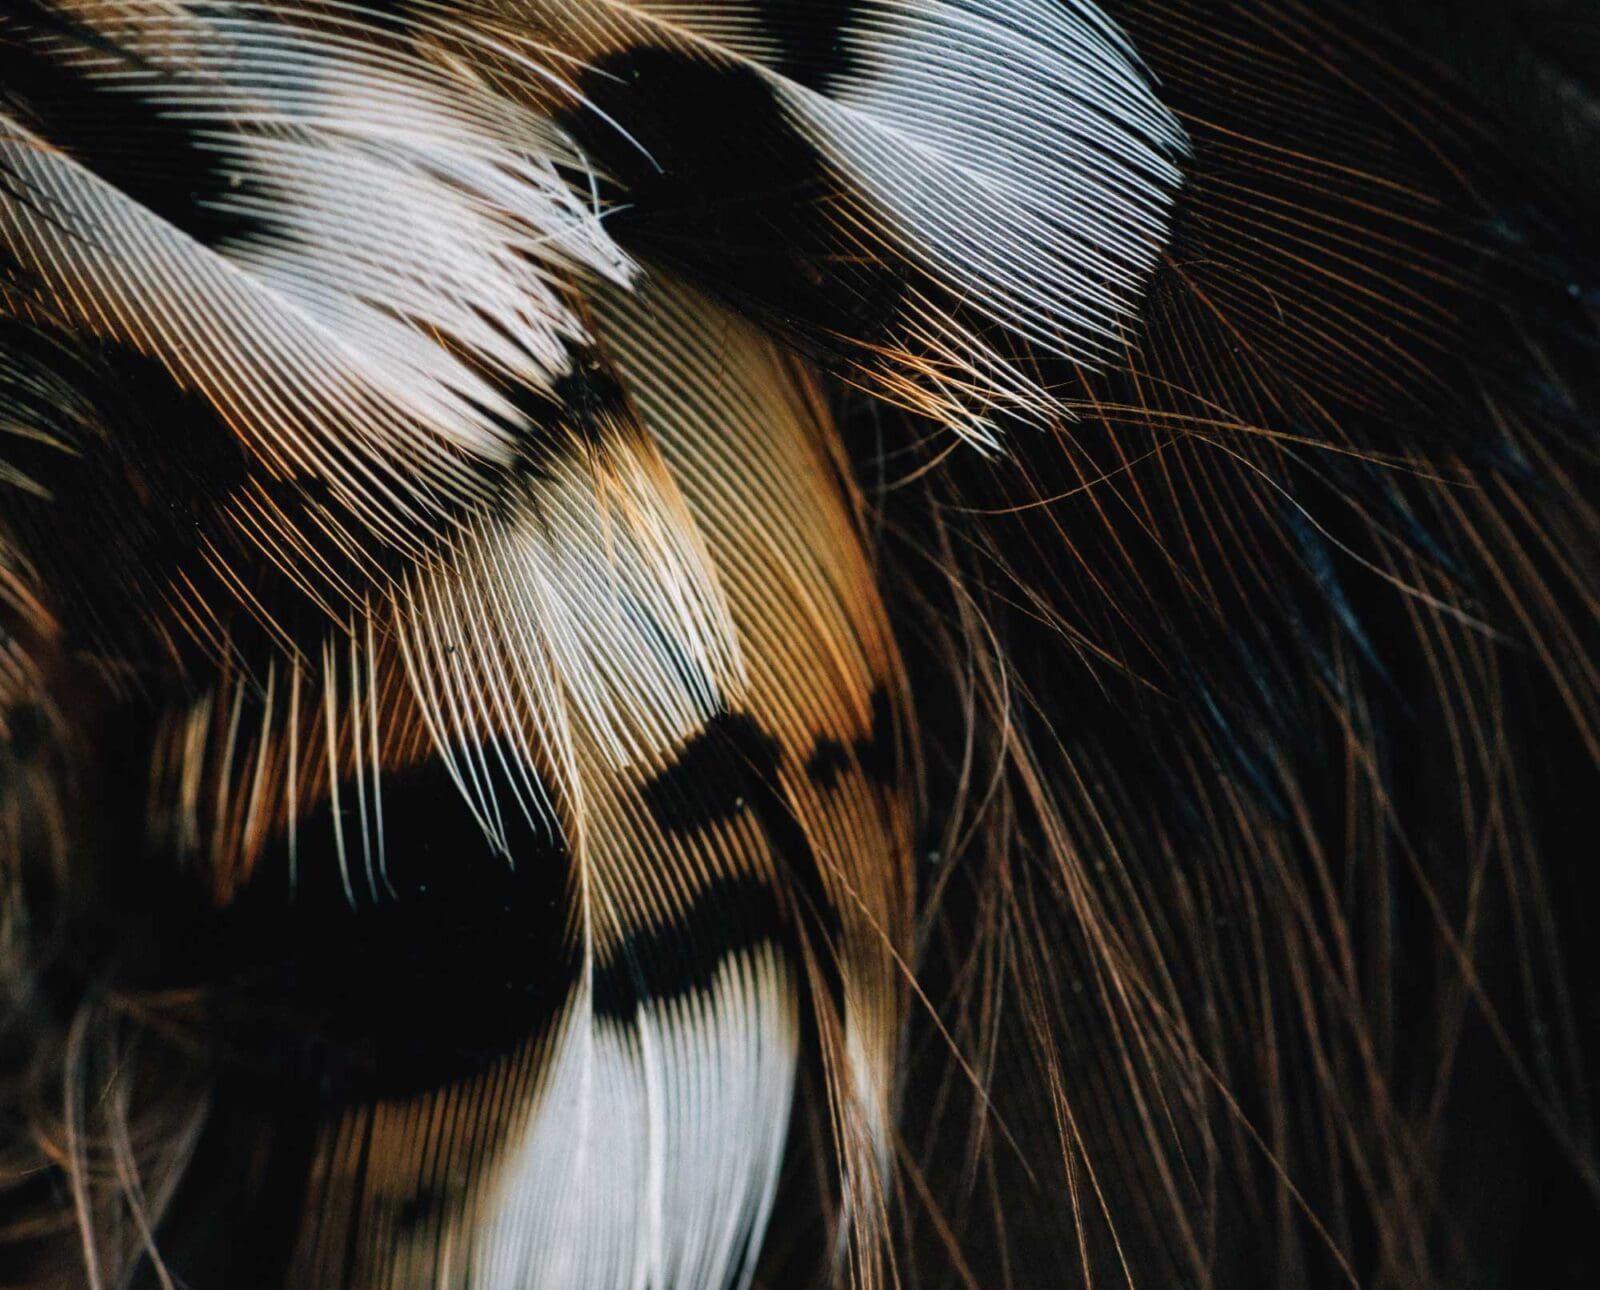 a close up photo of grouse feathers